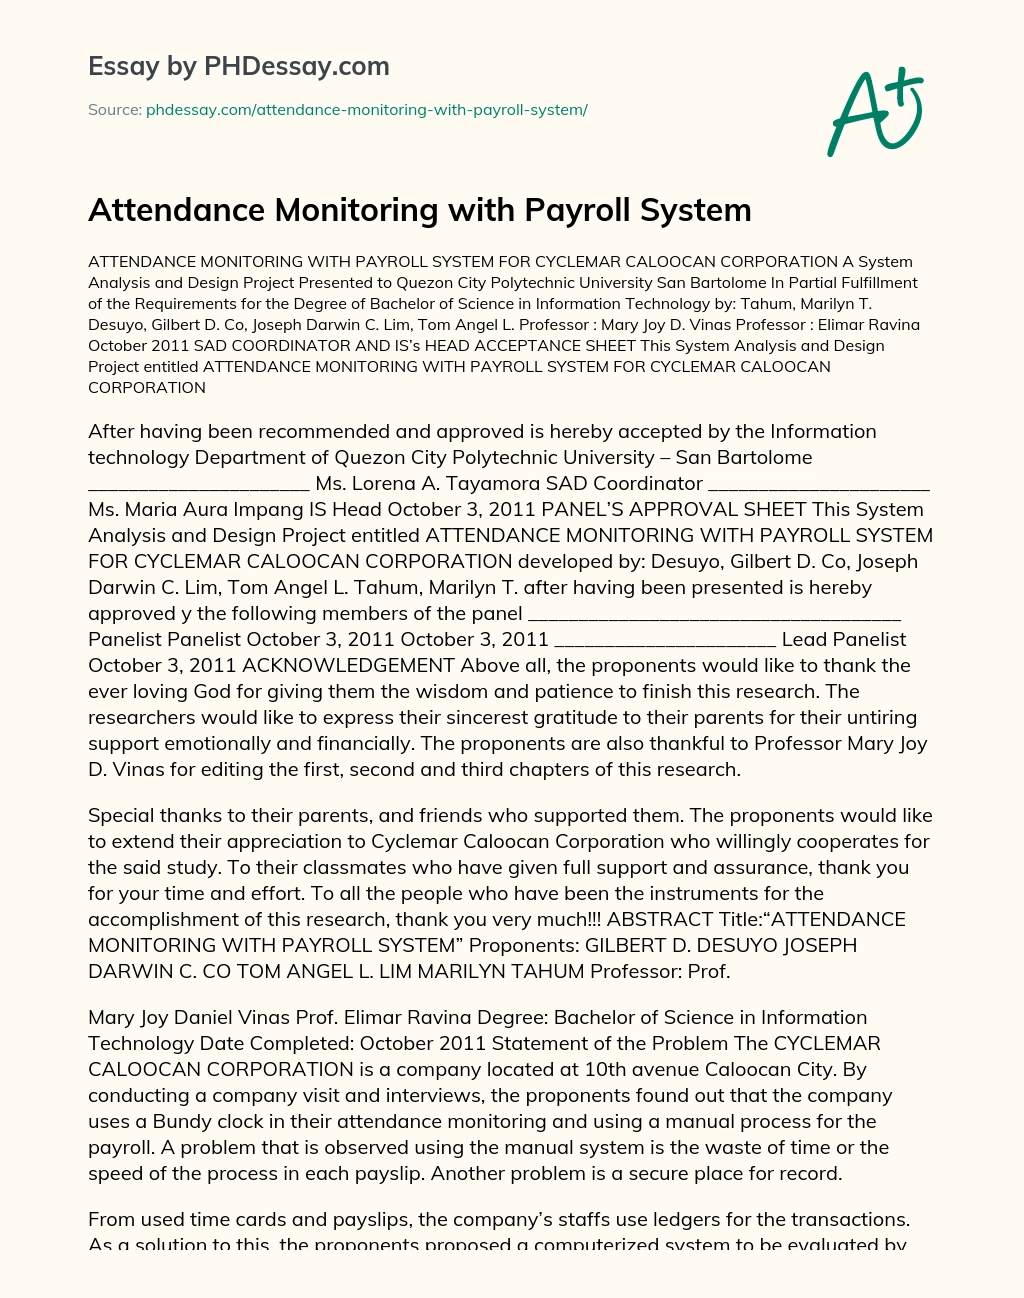 Attendance Monitoring with Payroll System essay